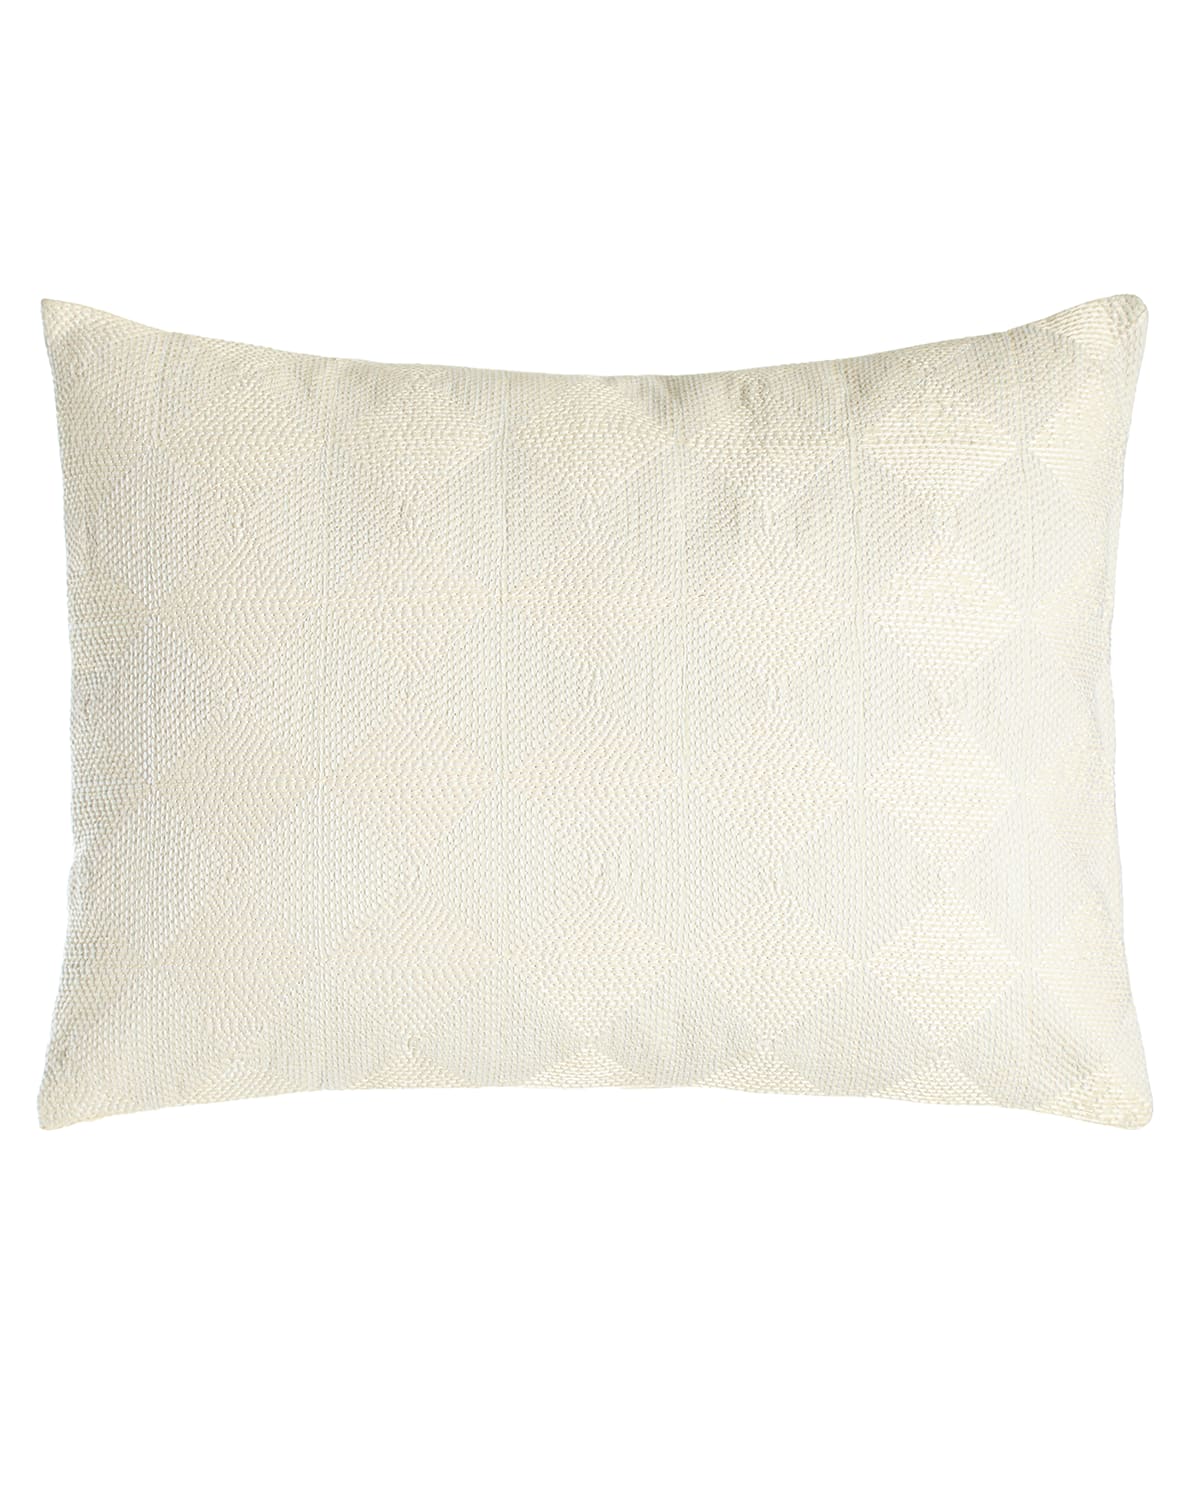 Image Vera Wang Sti Thread Counthed Concentric Squares Pillow, 12" x 16"